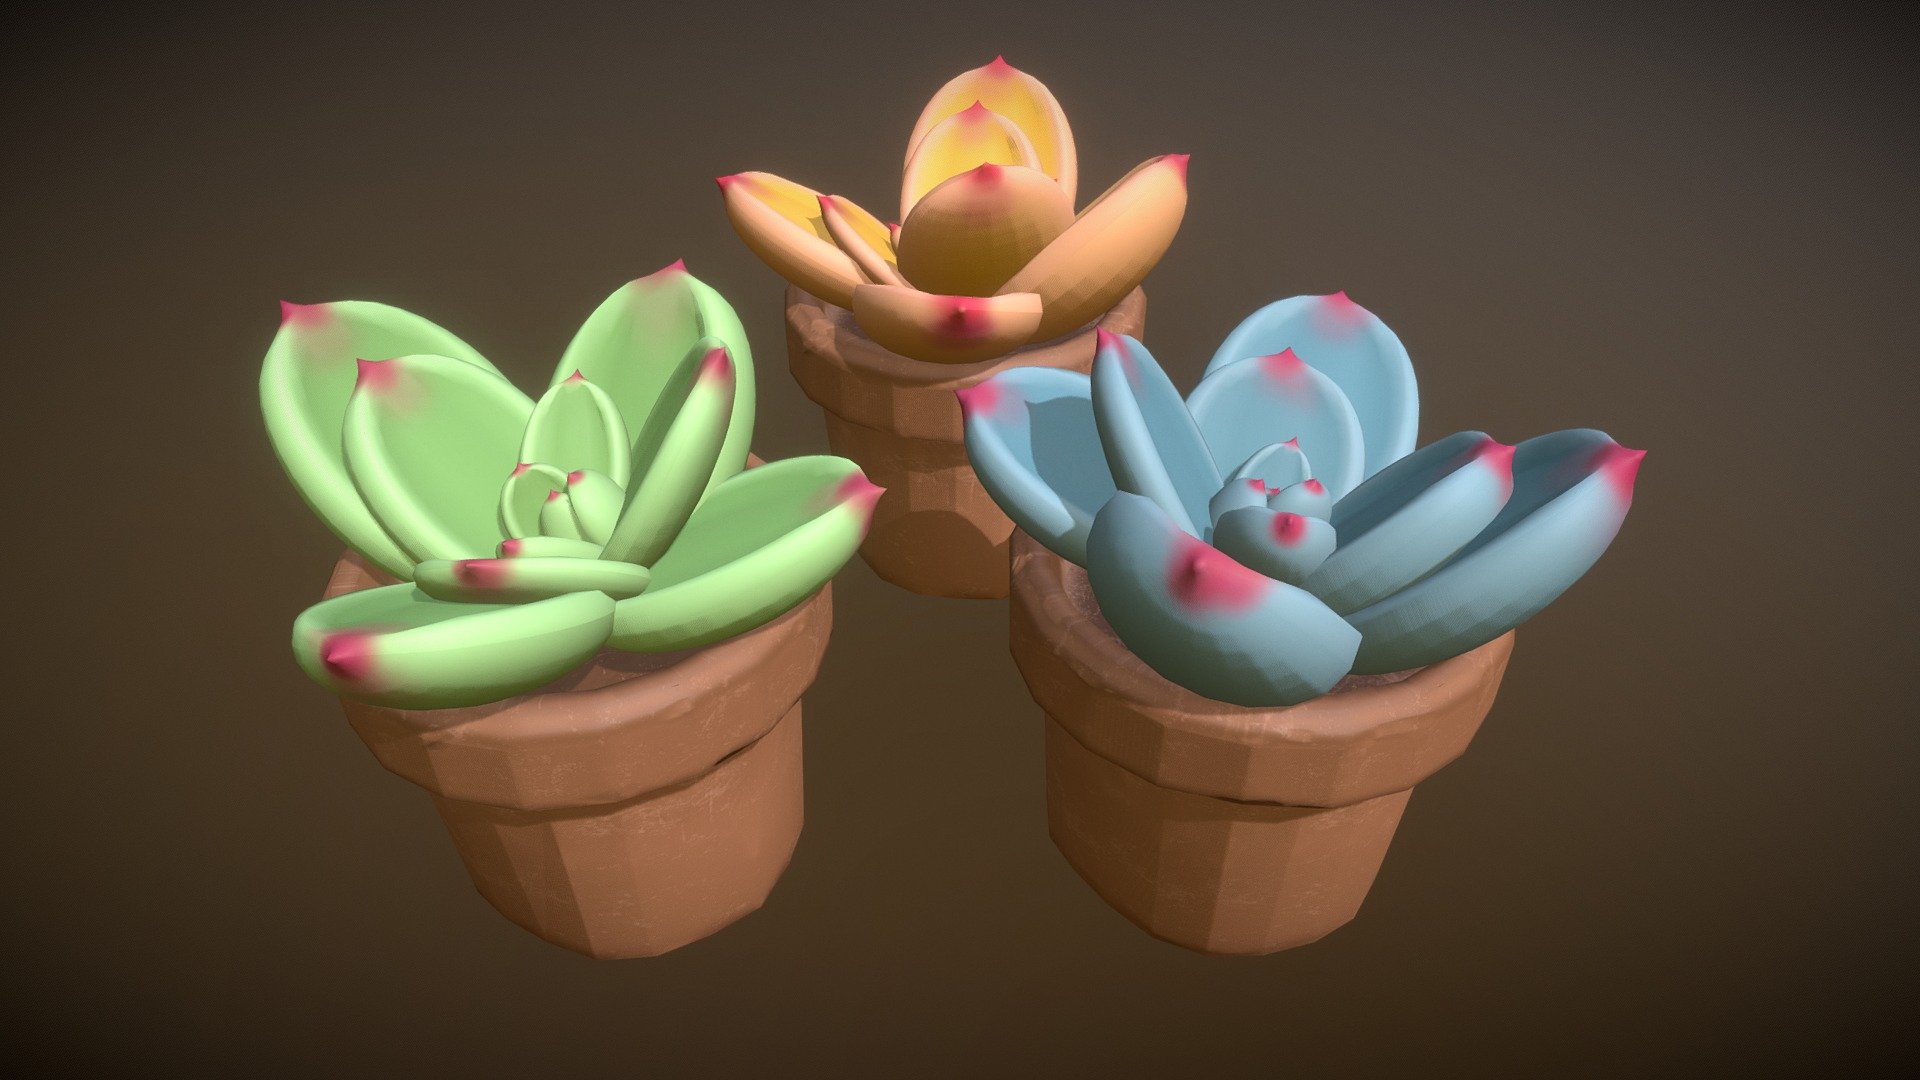 Finished the succulent plants with three different colors! Really liked this small project and might do different kinds of succulent plants in the future 3d model